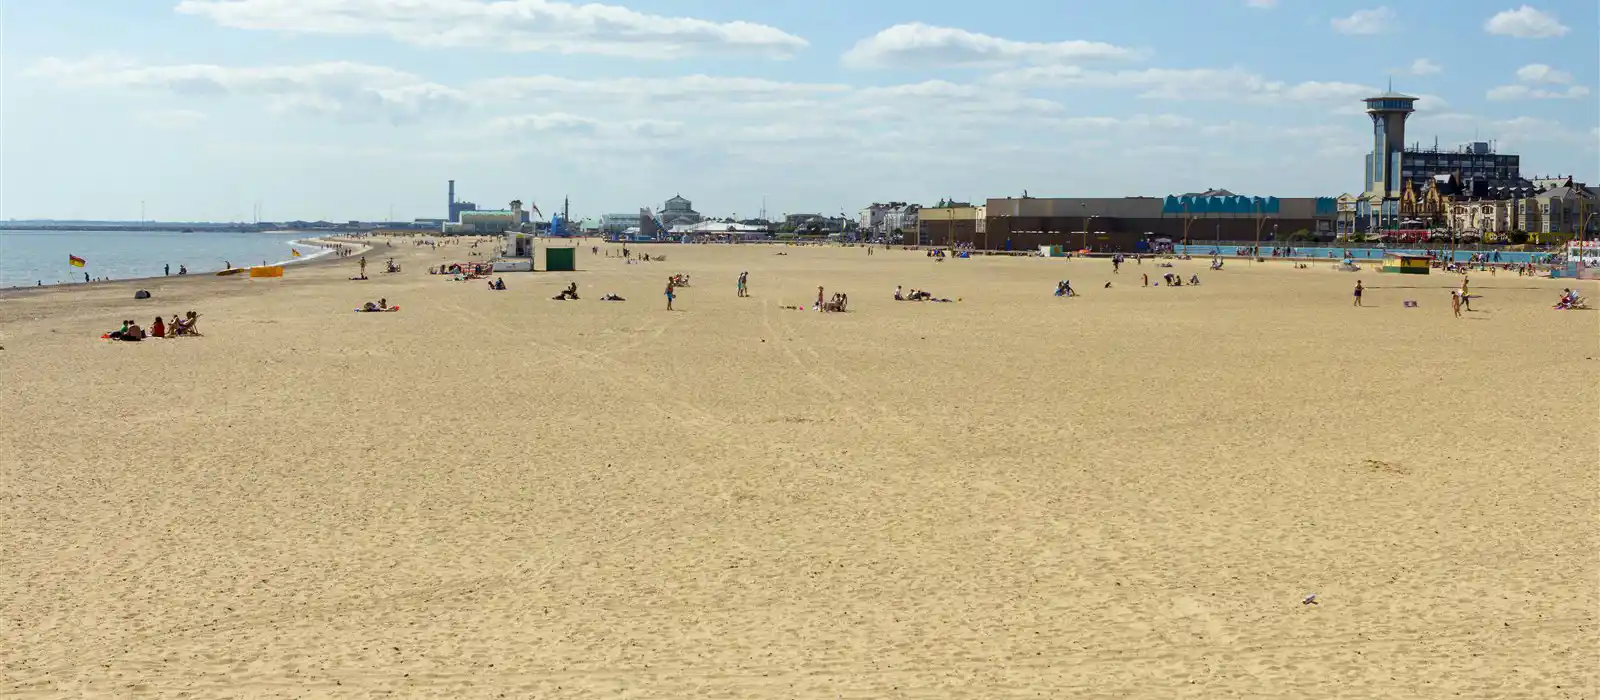 Great Yarmouth in Norfolk